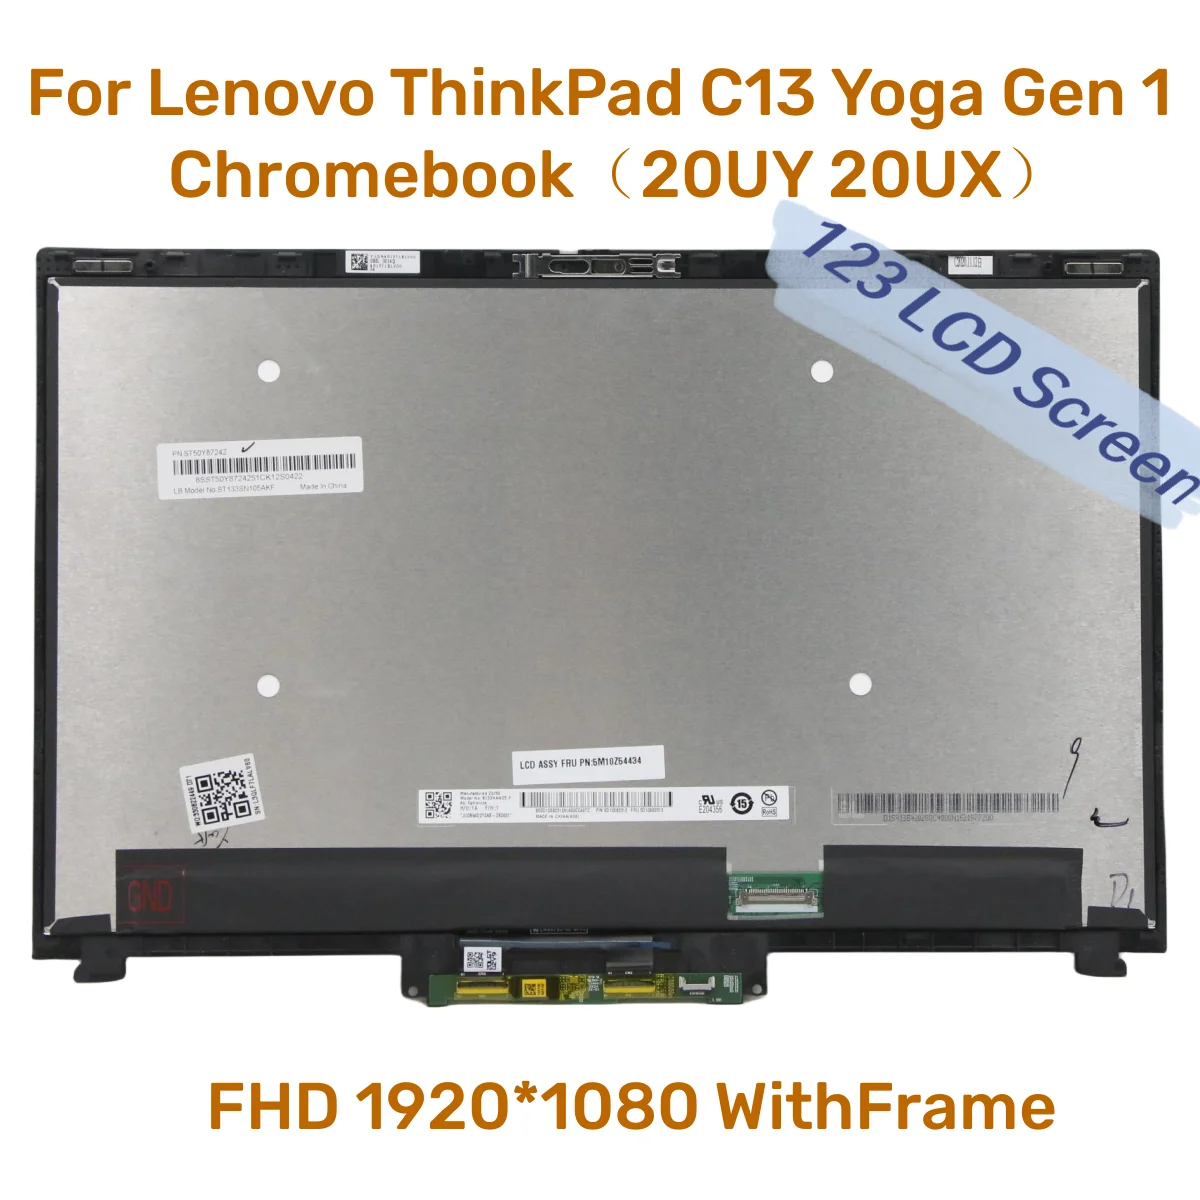 

For Lenovo ThinkPad C13 Yoga Gen 1 Chromebook 20UX 20UY LCD Touch Screen Display Assembly 5M10Z54438 5M10Z54435 5M10Z54434 FHD